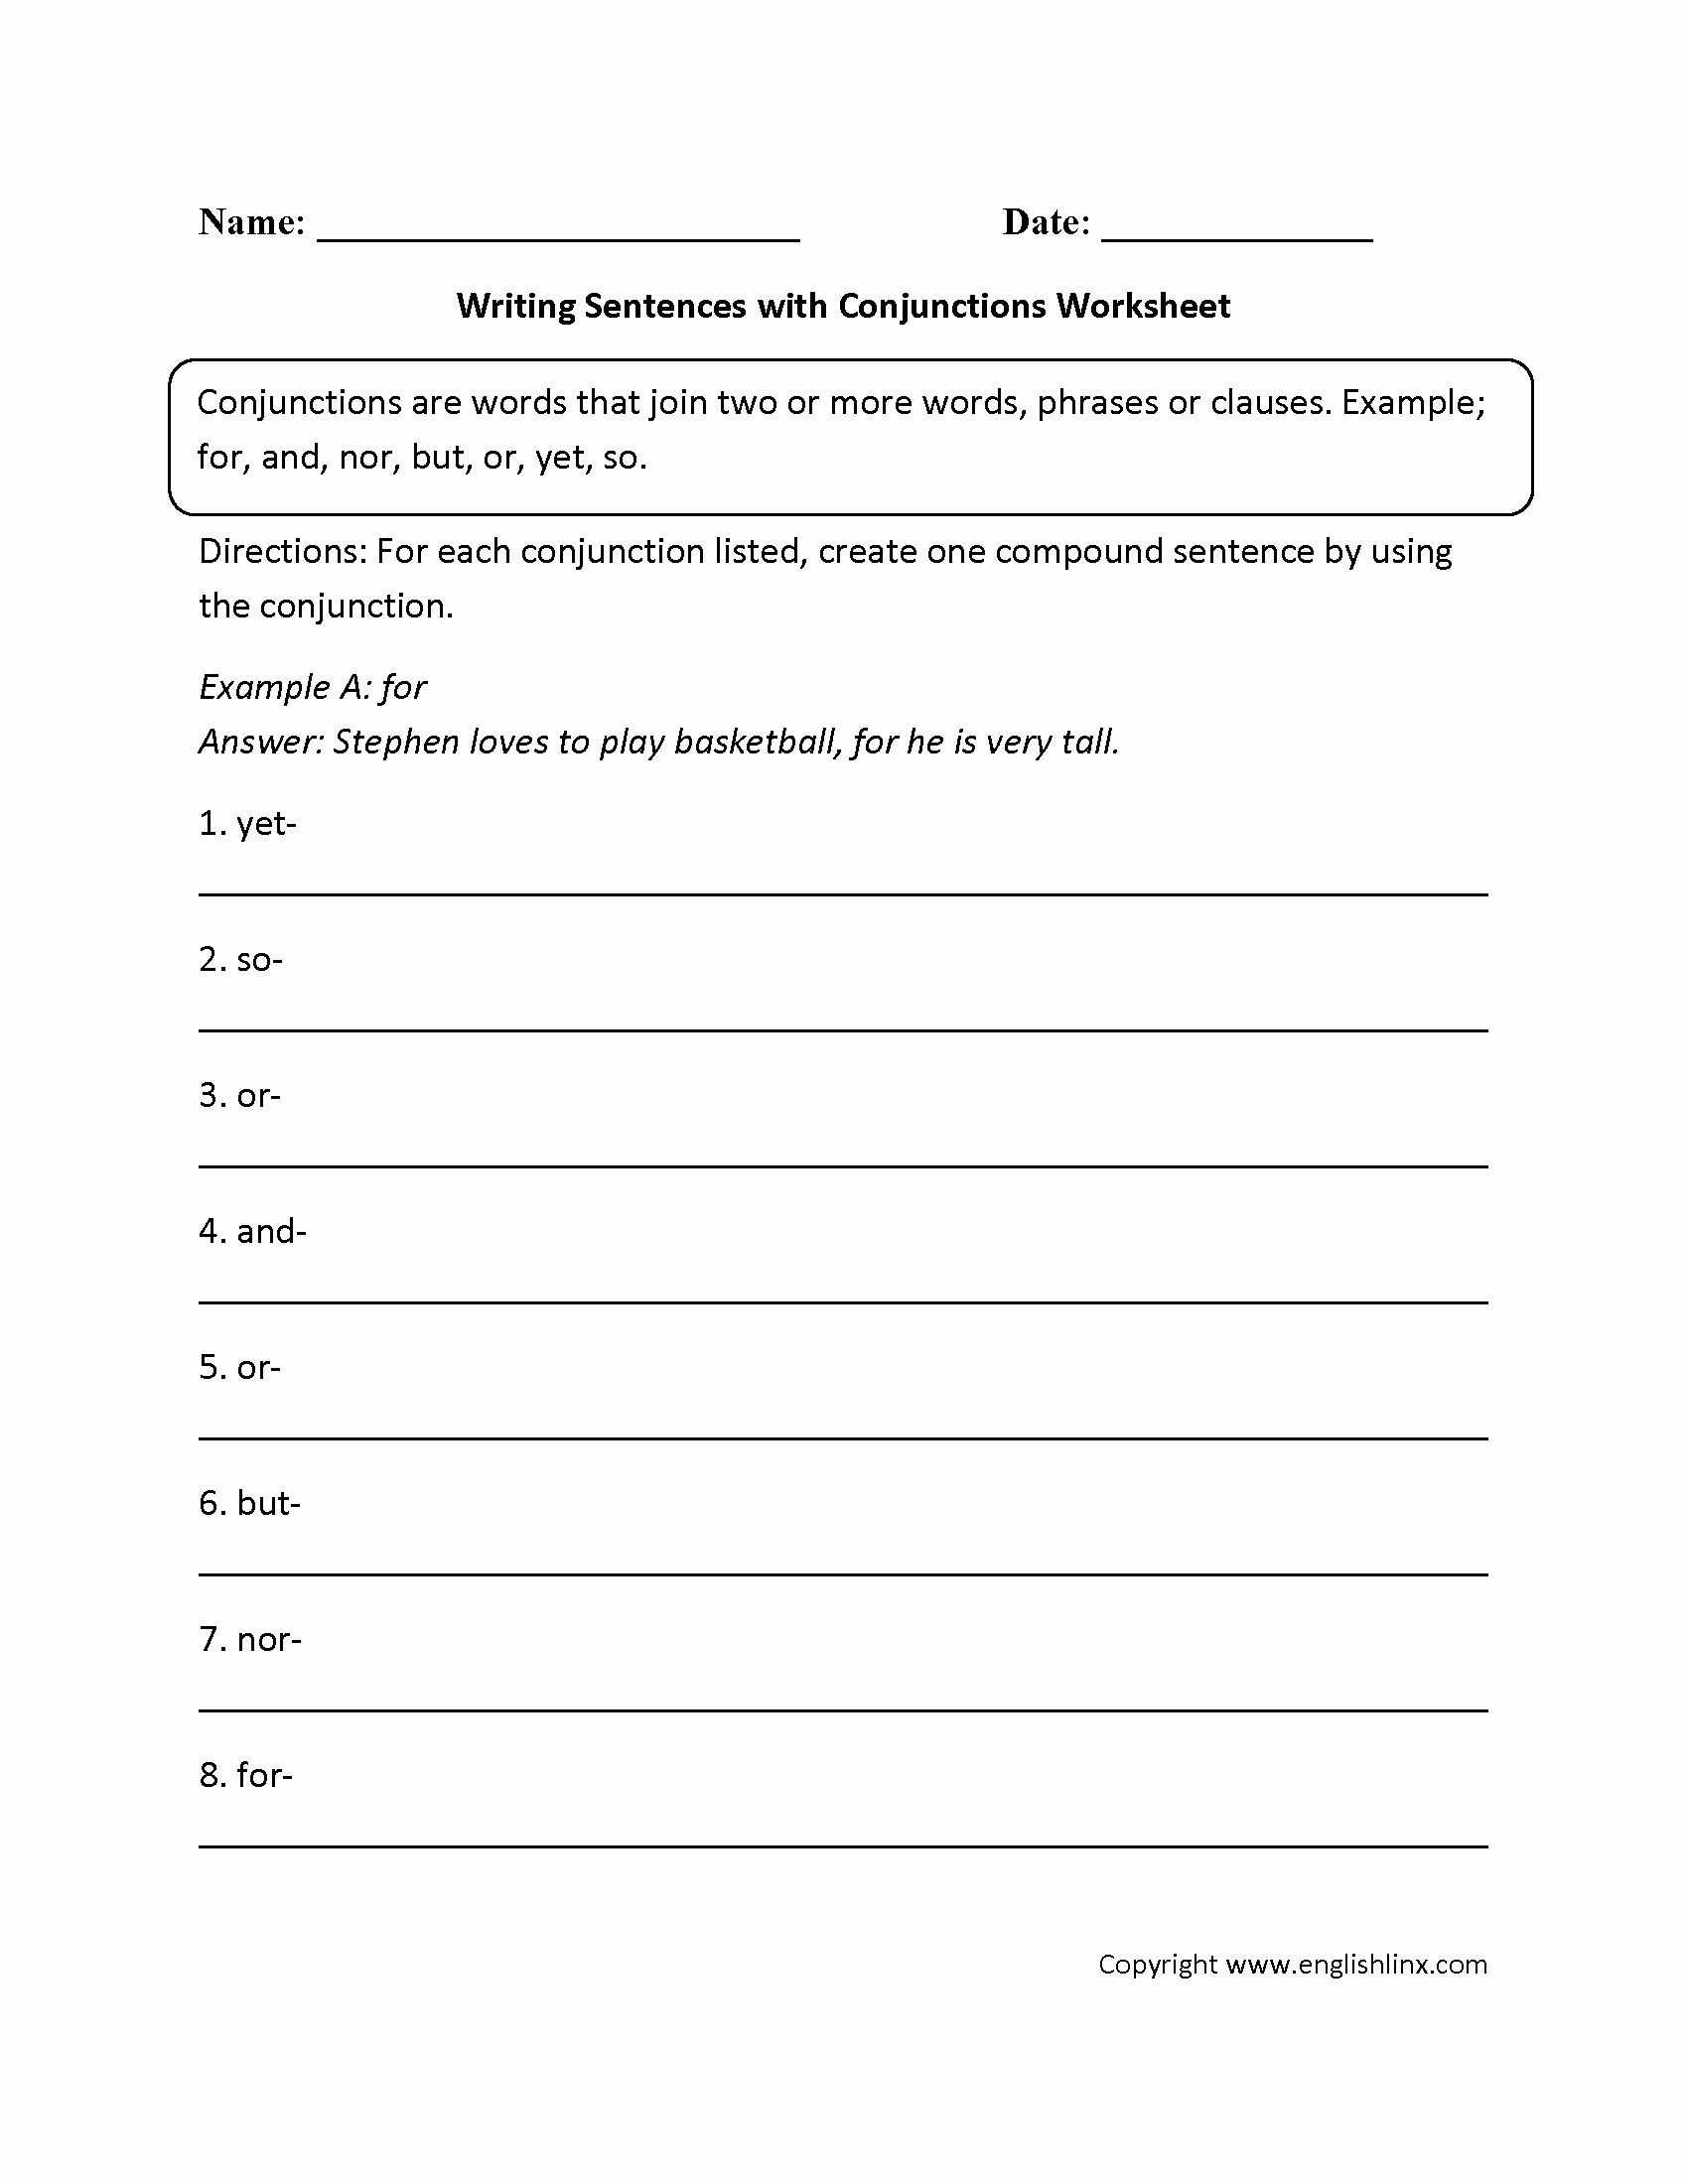 Dna Replication Coloring Worksheet Answer Key Along with Dna Mutations Practice Worksheet Answer Key Inspirational Mutations